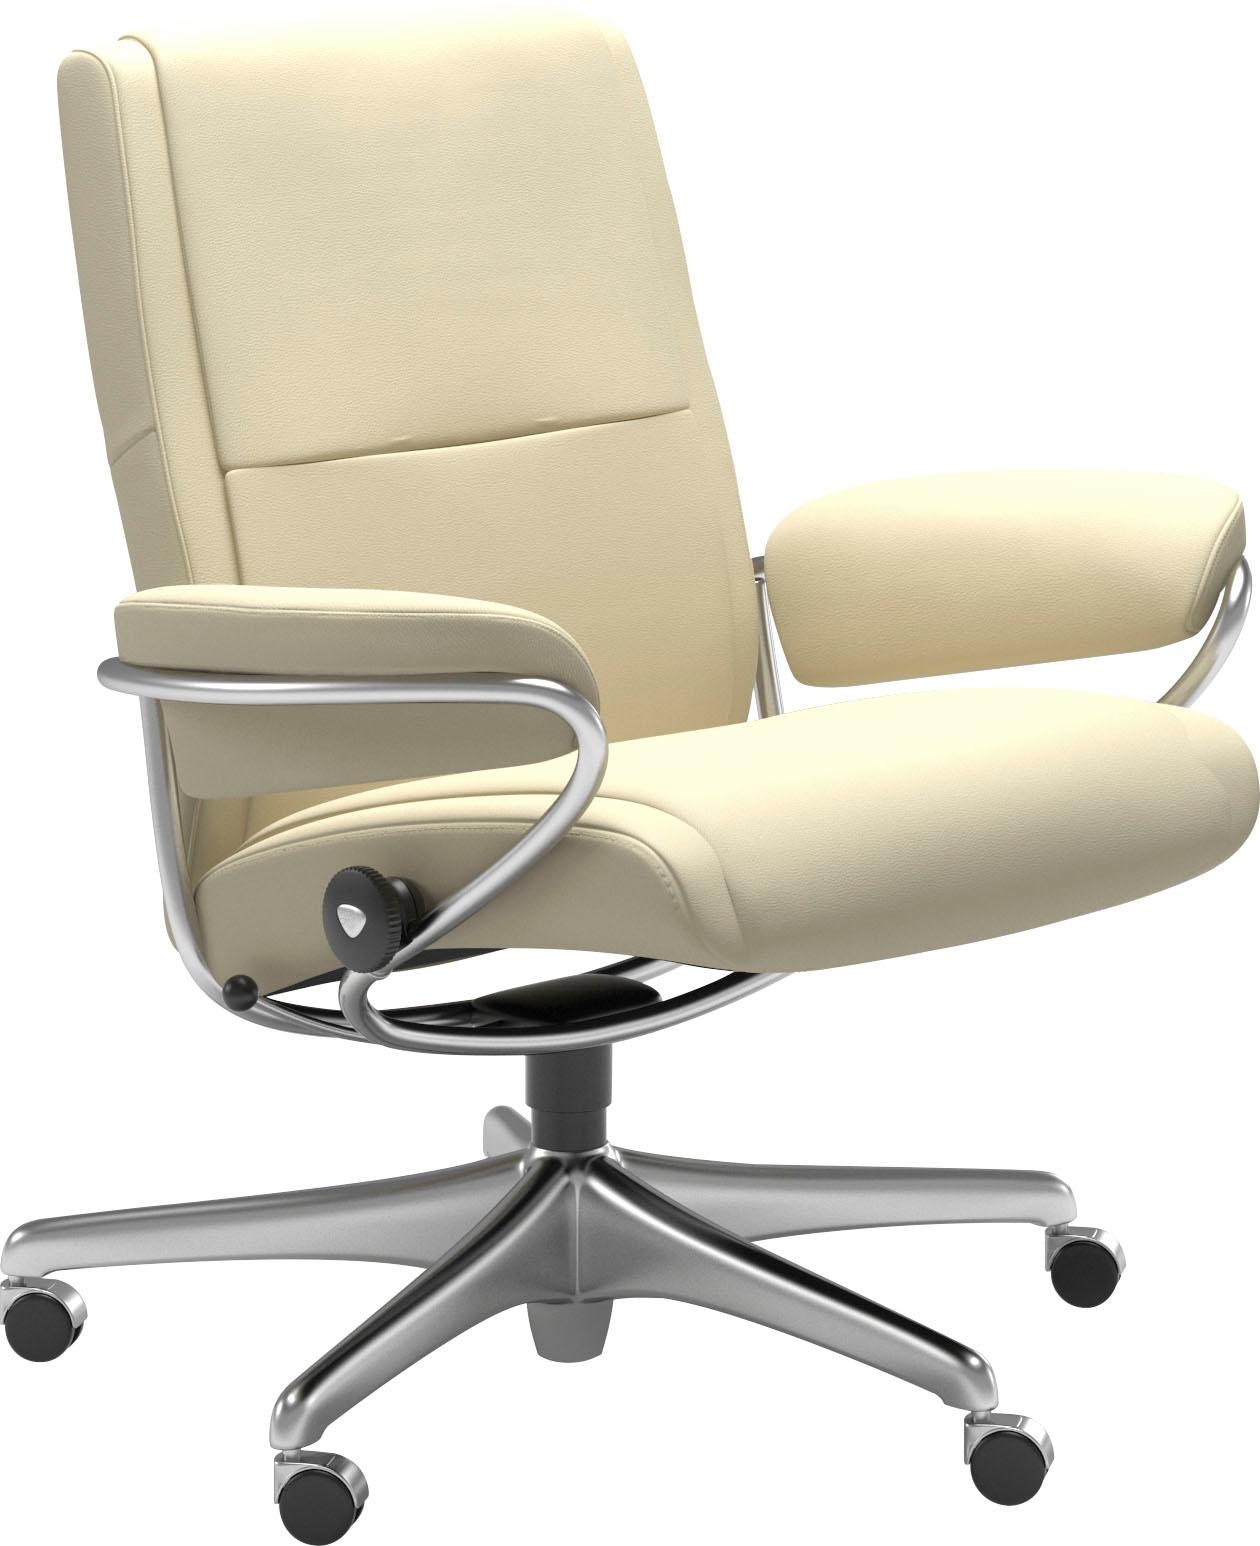 Stressless® Relaxsessel »Paris«, Low Back, BAUR Gestell Home Base, kaufen Office Chrom | mit